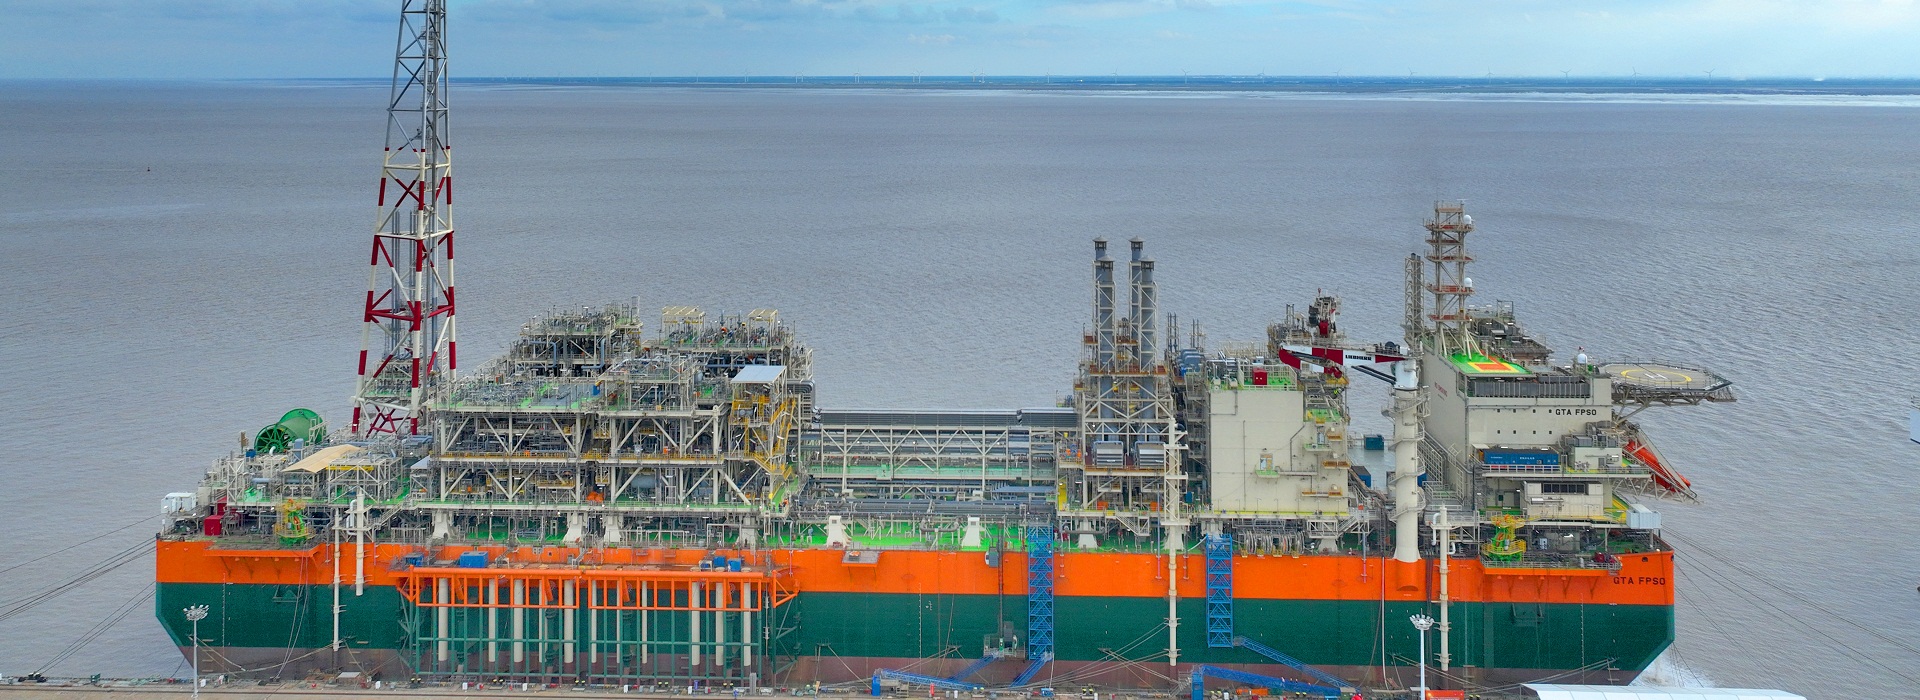 World's largest FPSO vessel completed in Qidong